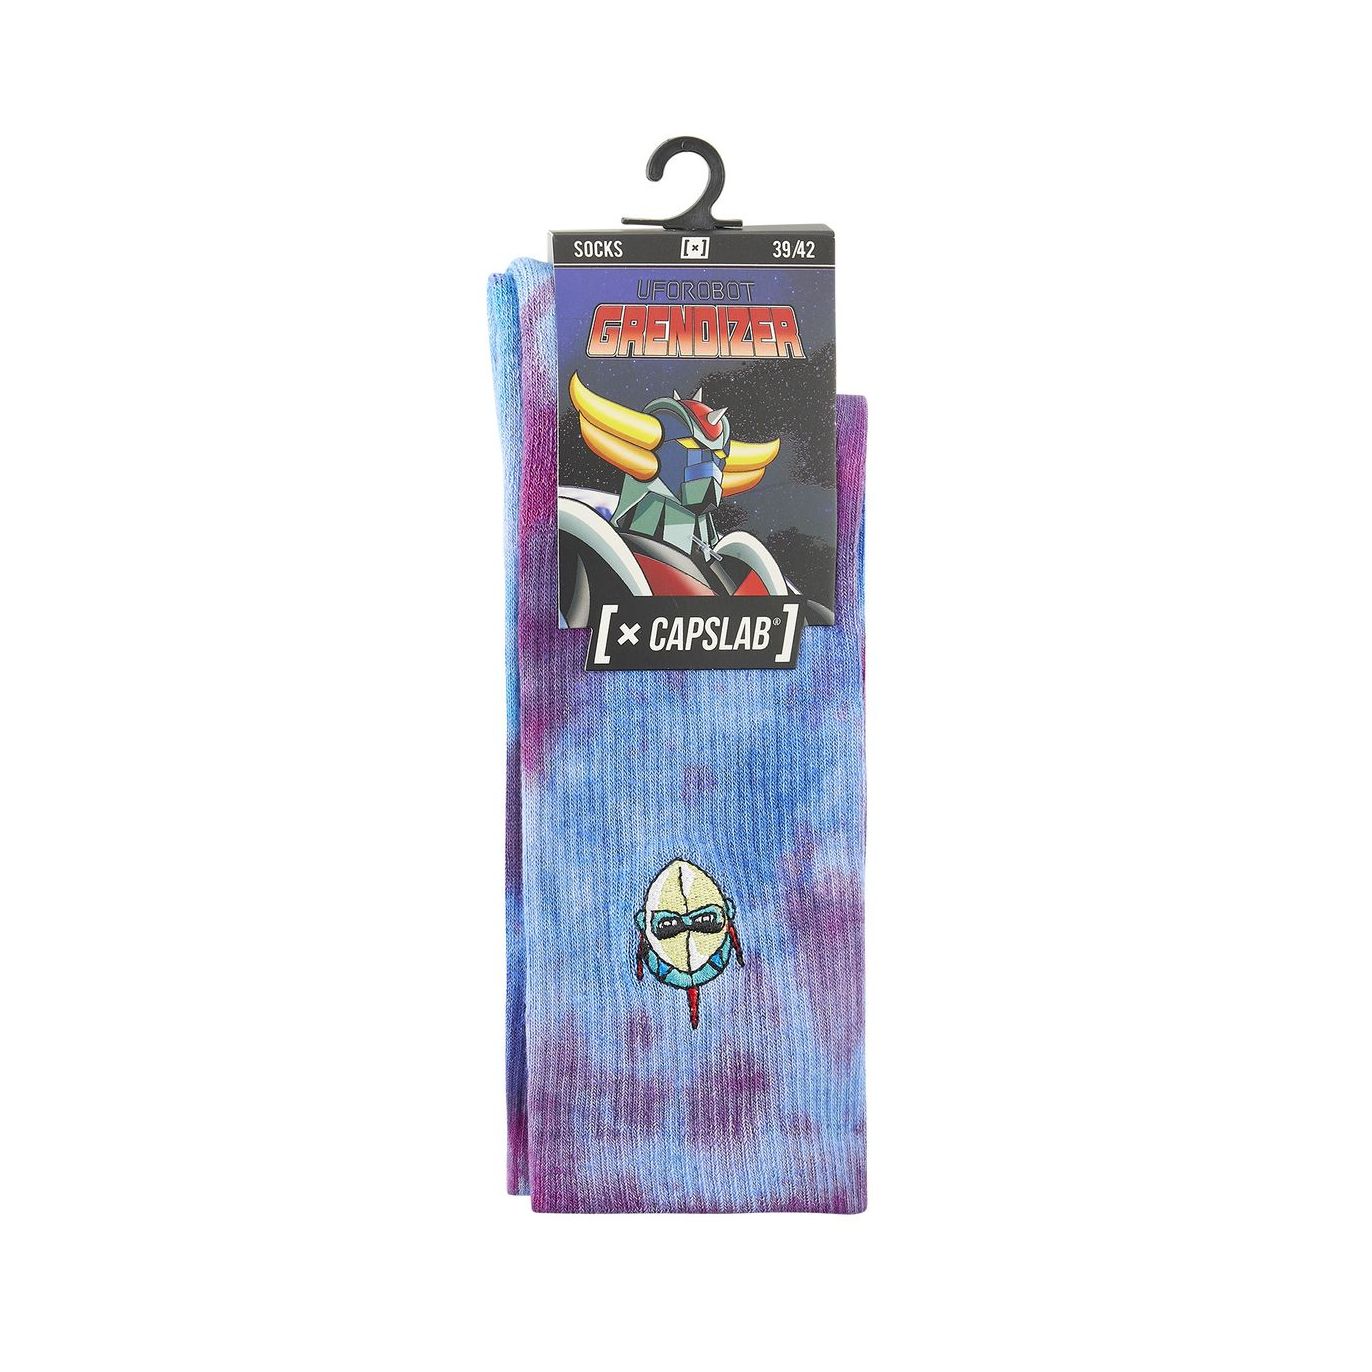 chaussettes capslab tie and dye goldorak act2 3